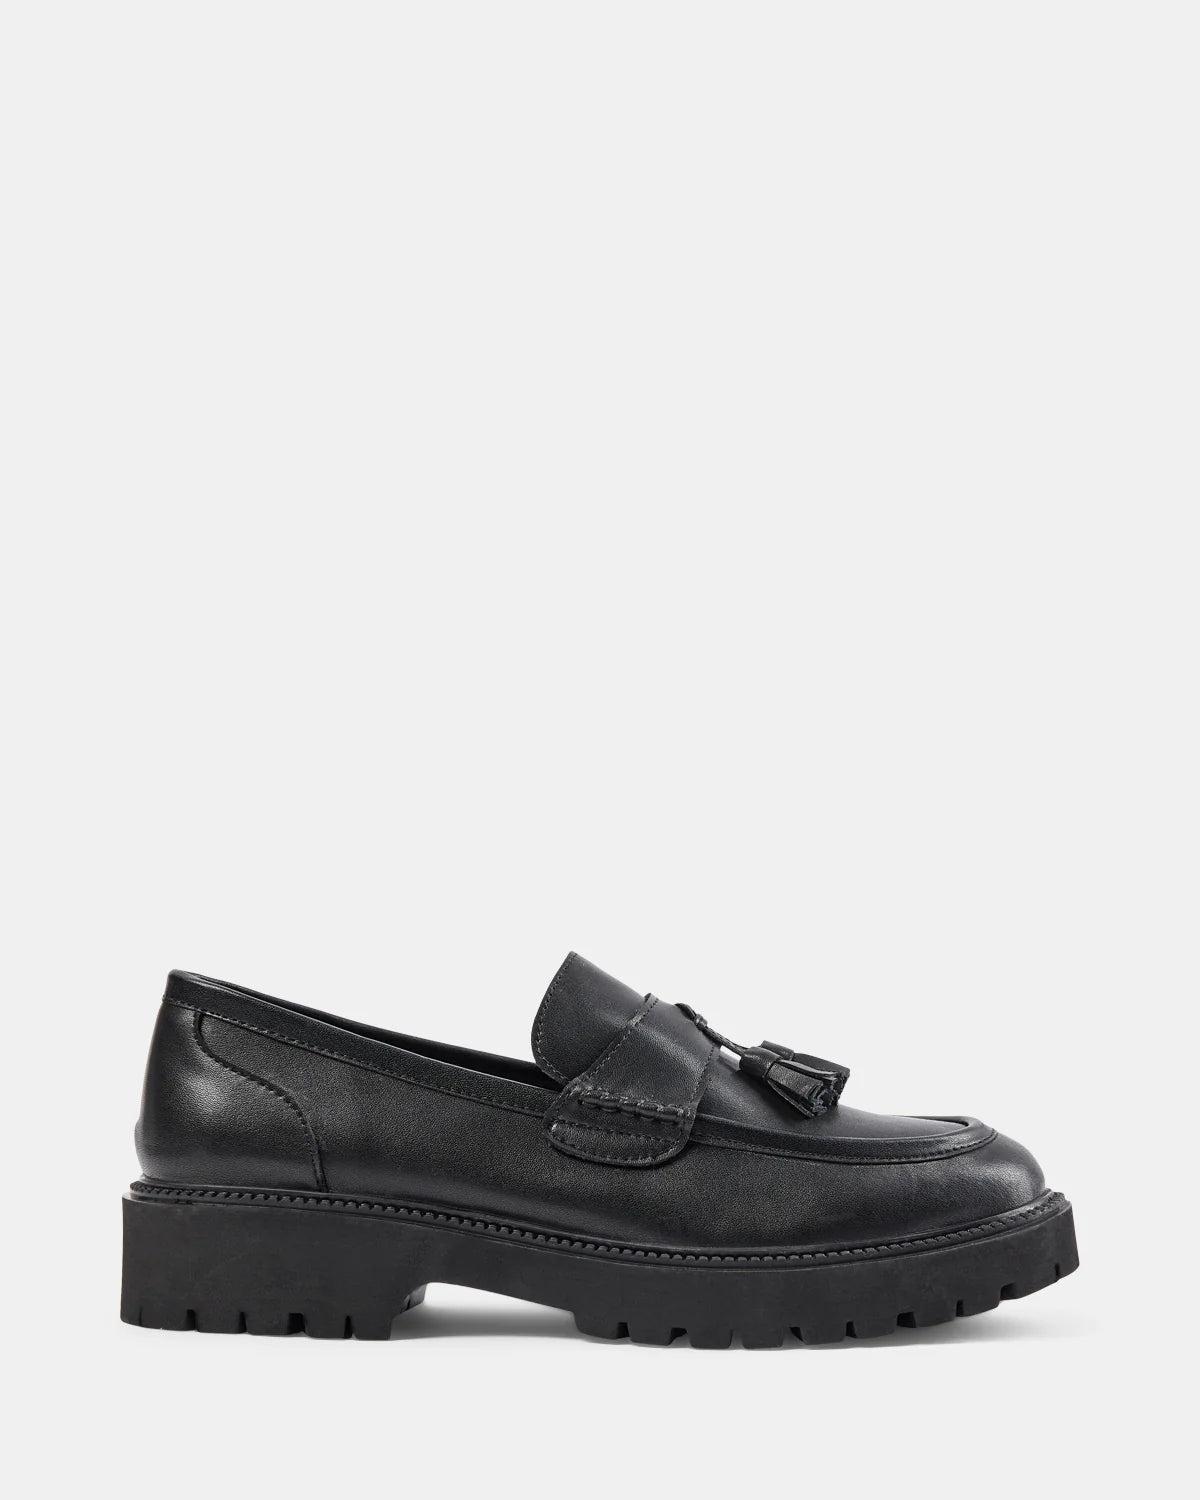 The CLASSIC Loafer